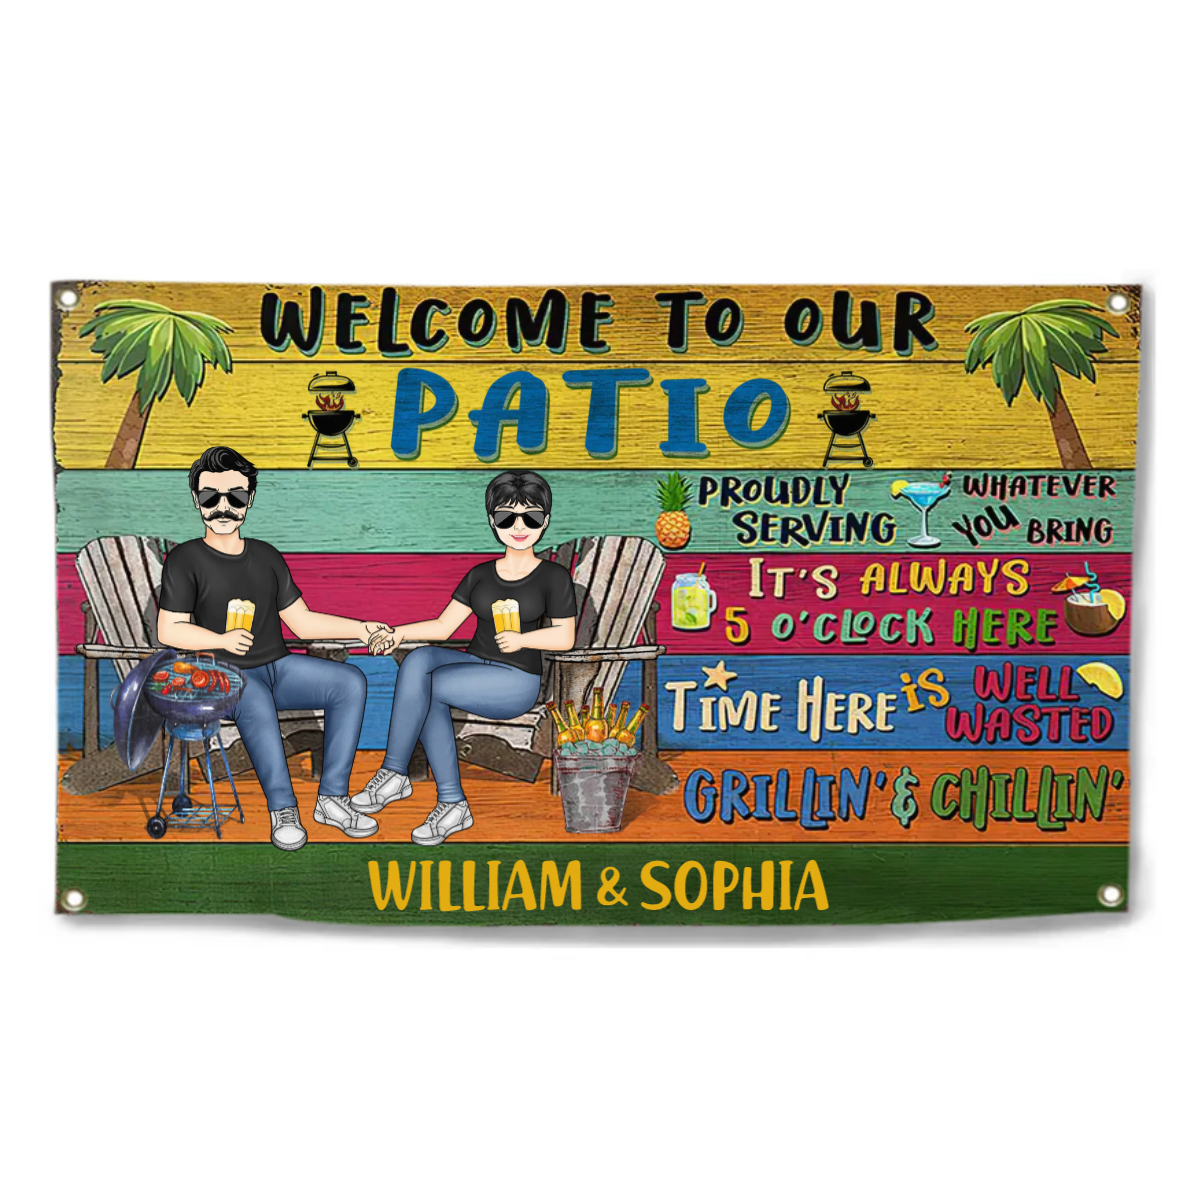 Grilling Couple Welcome To Our Patio Proudly Serving Whatever You Bring - Gift For Couples - Personalized Custom Banner